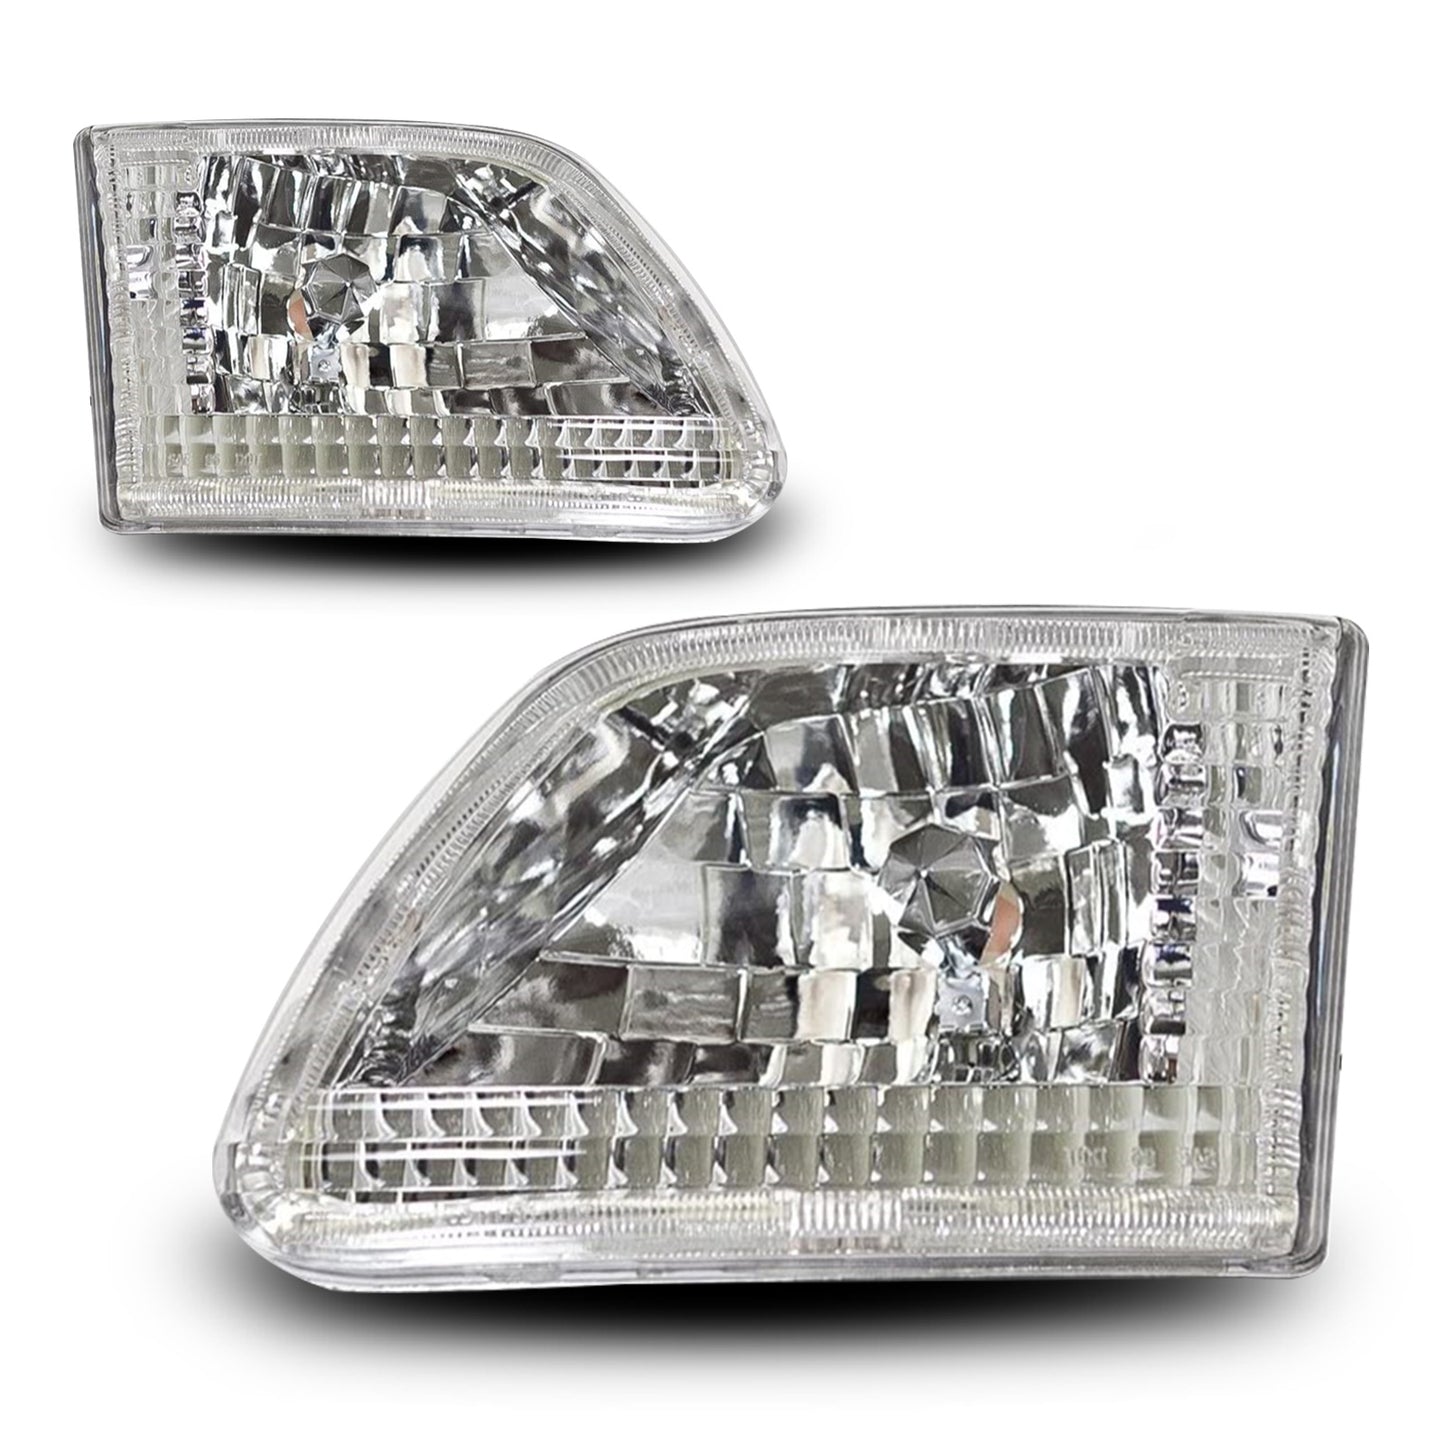 1997-2003 Ford F-150/2004 Ford F-150 Heritage/1997-1999 Ford F-250 LightDuty/1997-2002 Expedition Head Light - Chrome/Clear